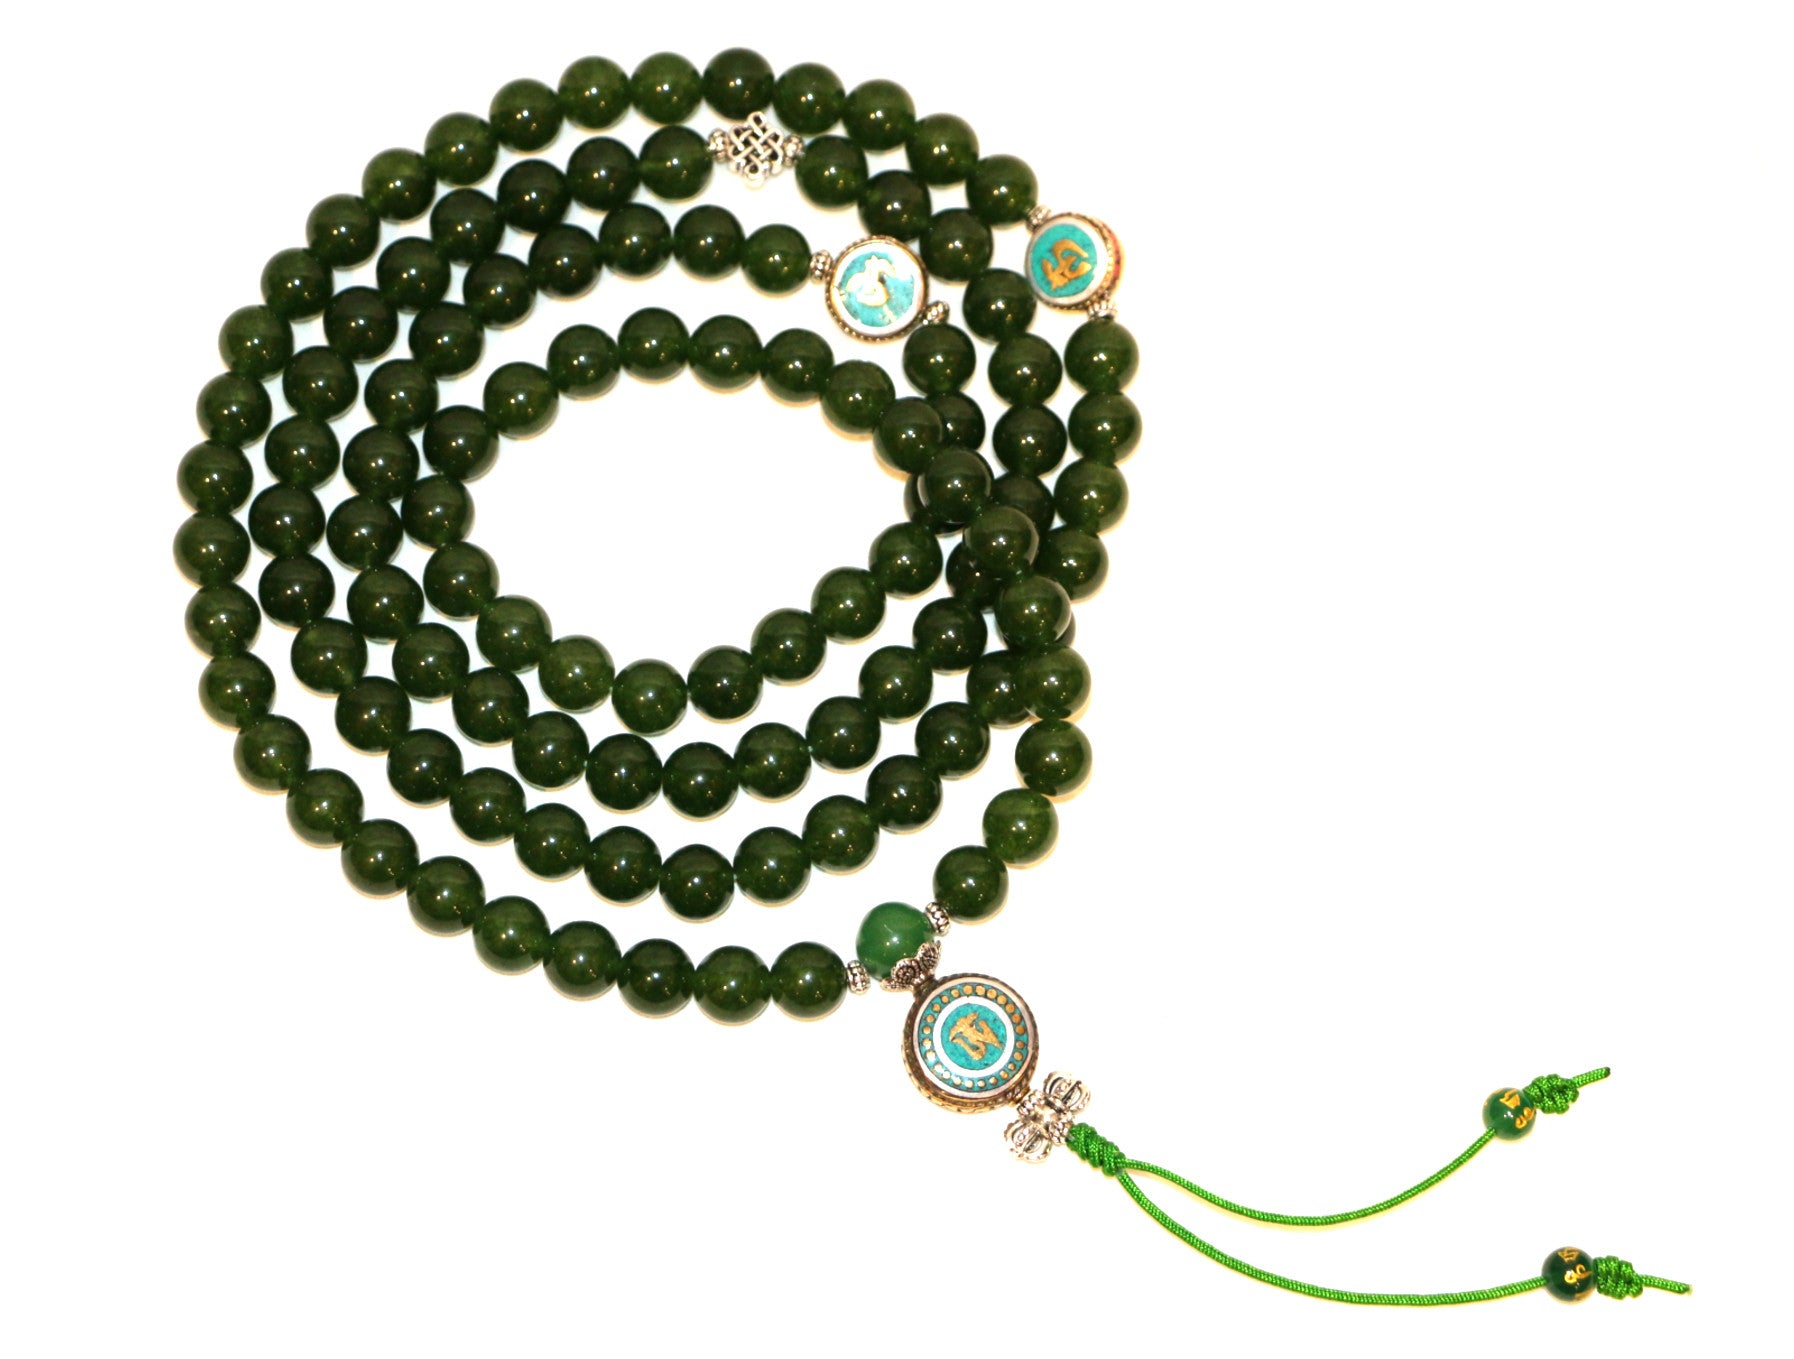 Special Green Jade Necklace Mala with OM - Tibet Arts & Healing